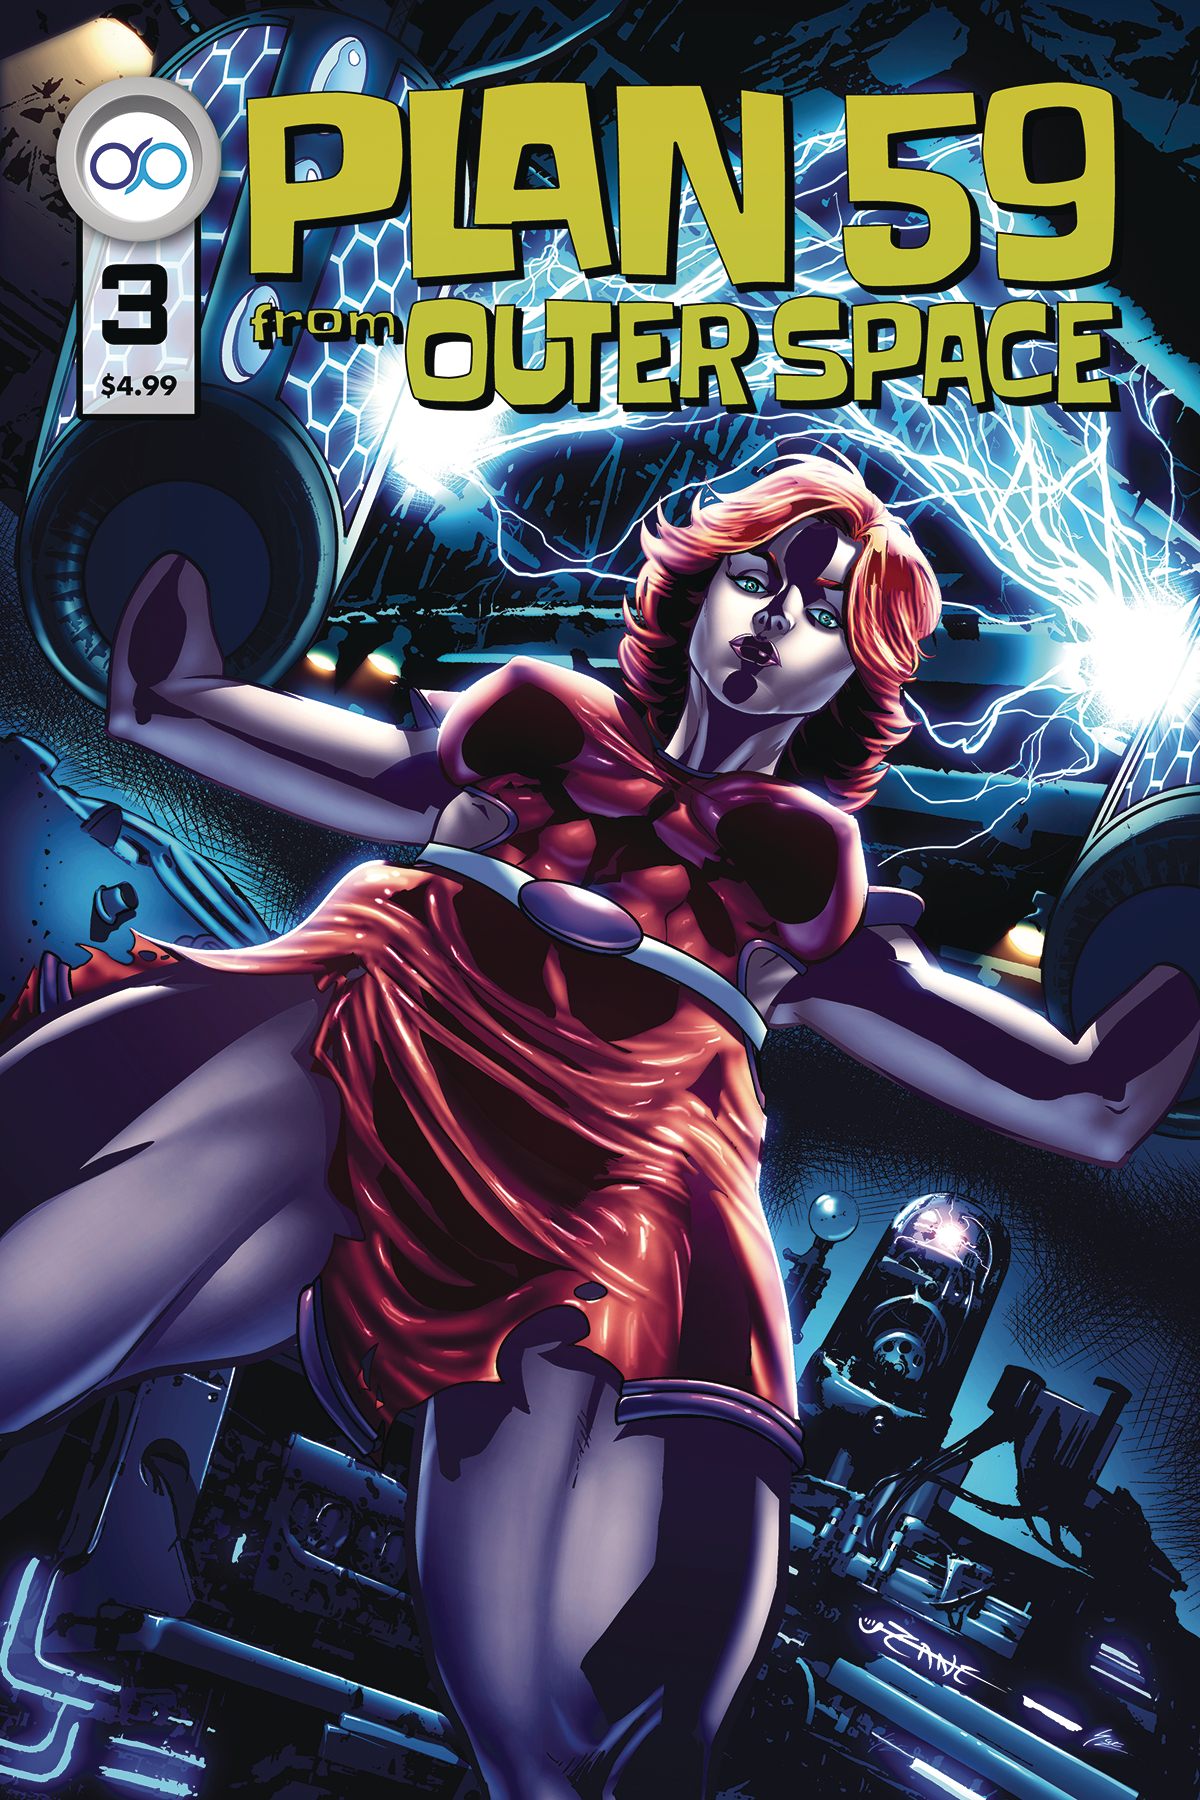 Plan 59 From Outer Space #3 (Mature) (Of 3)